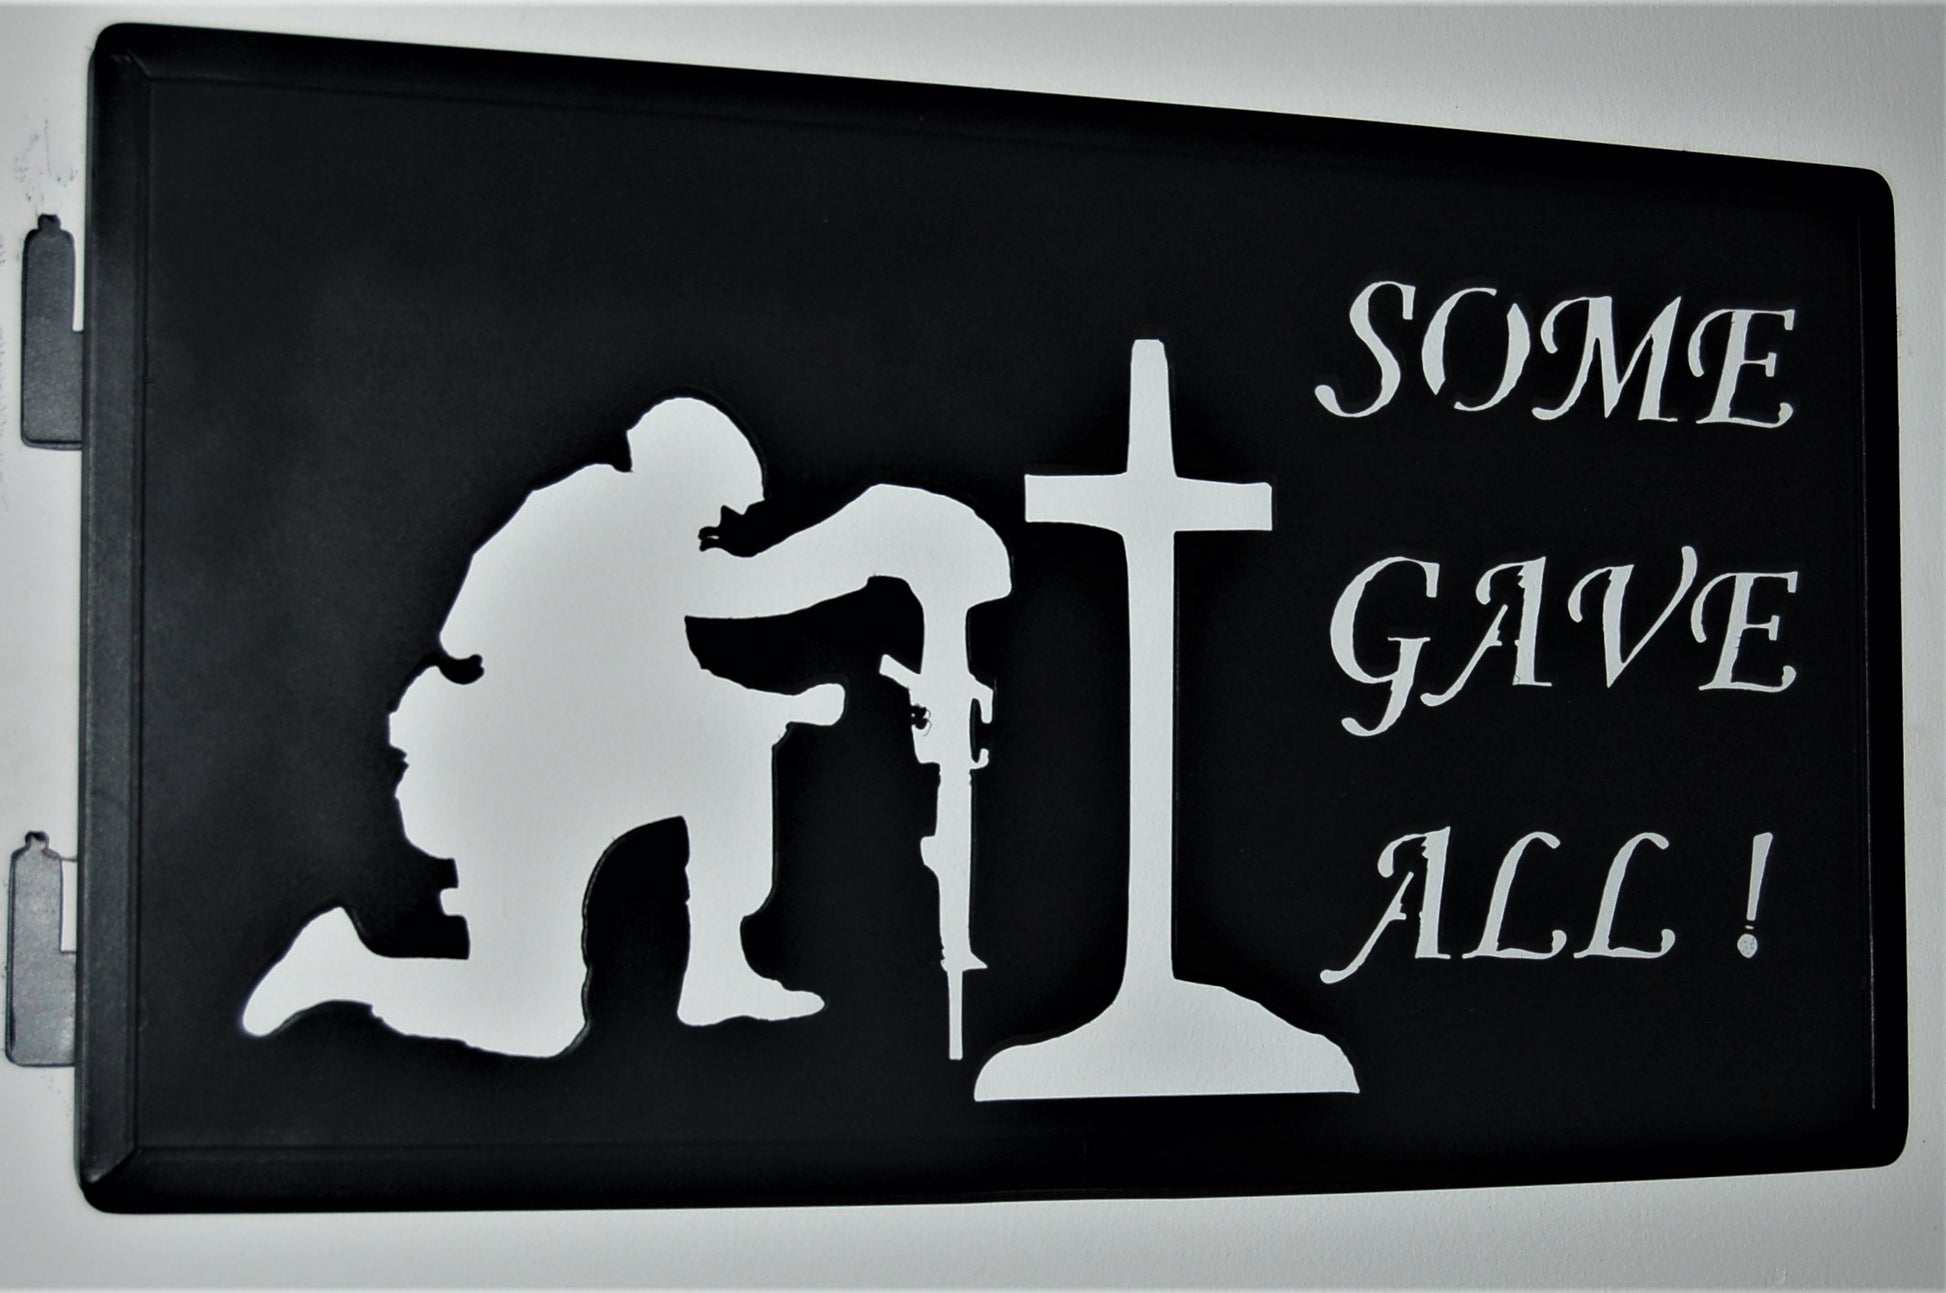 black metal Some Gave All! Inspiring panel with kneeling soldier, rifle, and cross